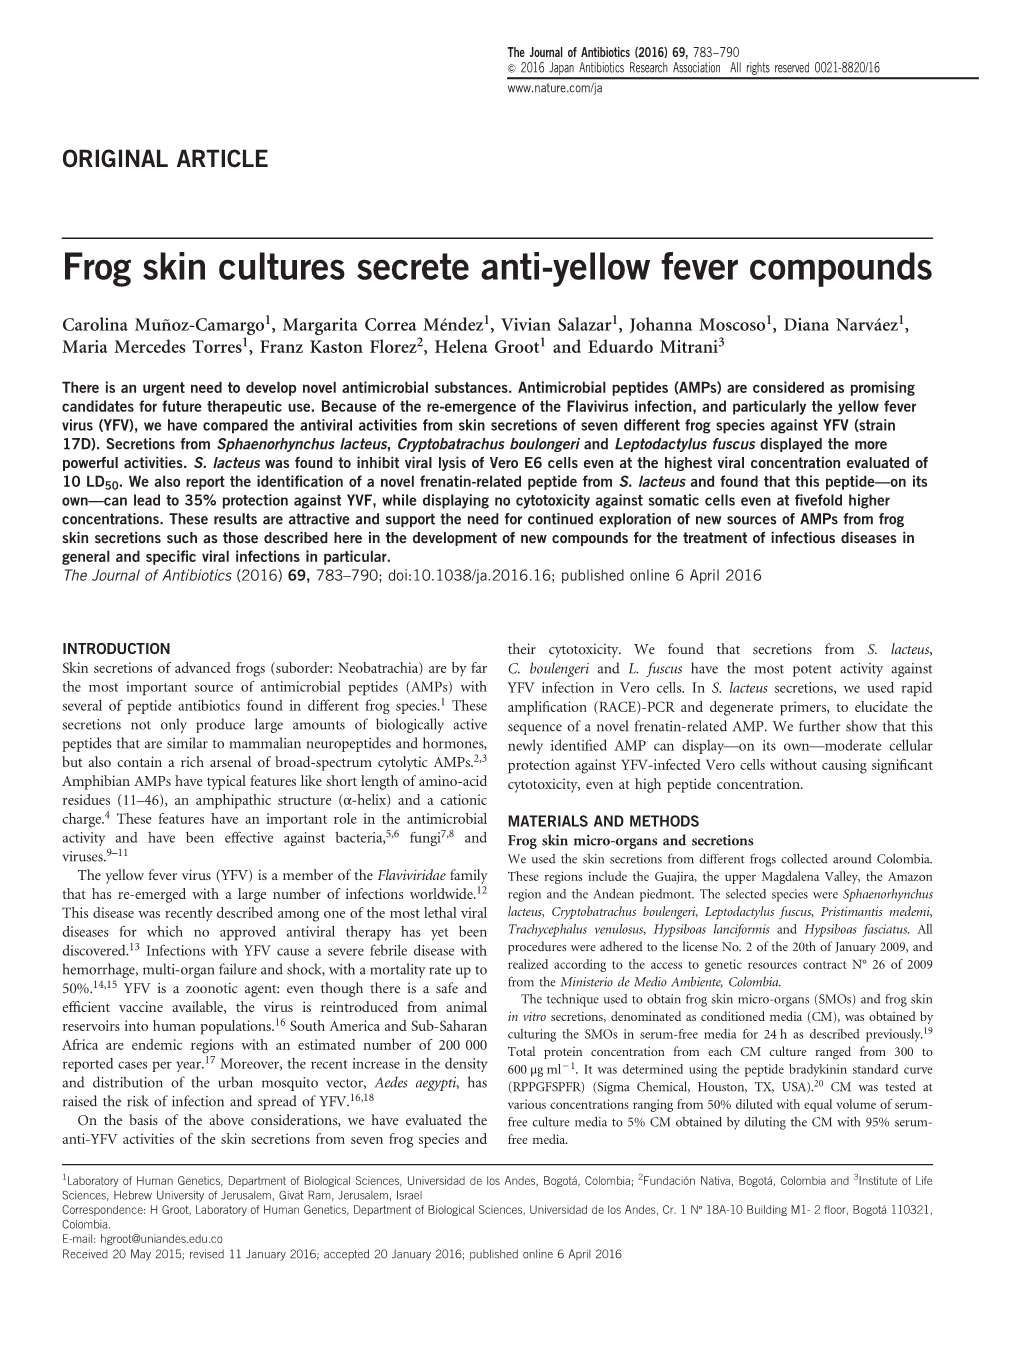 Frog Skin Cultures Secrete Anti-Yellow Fever Compounds